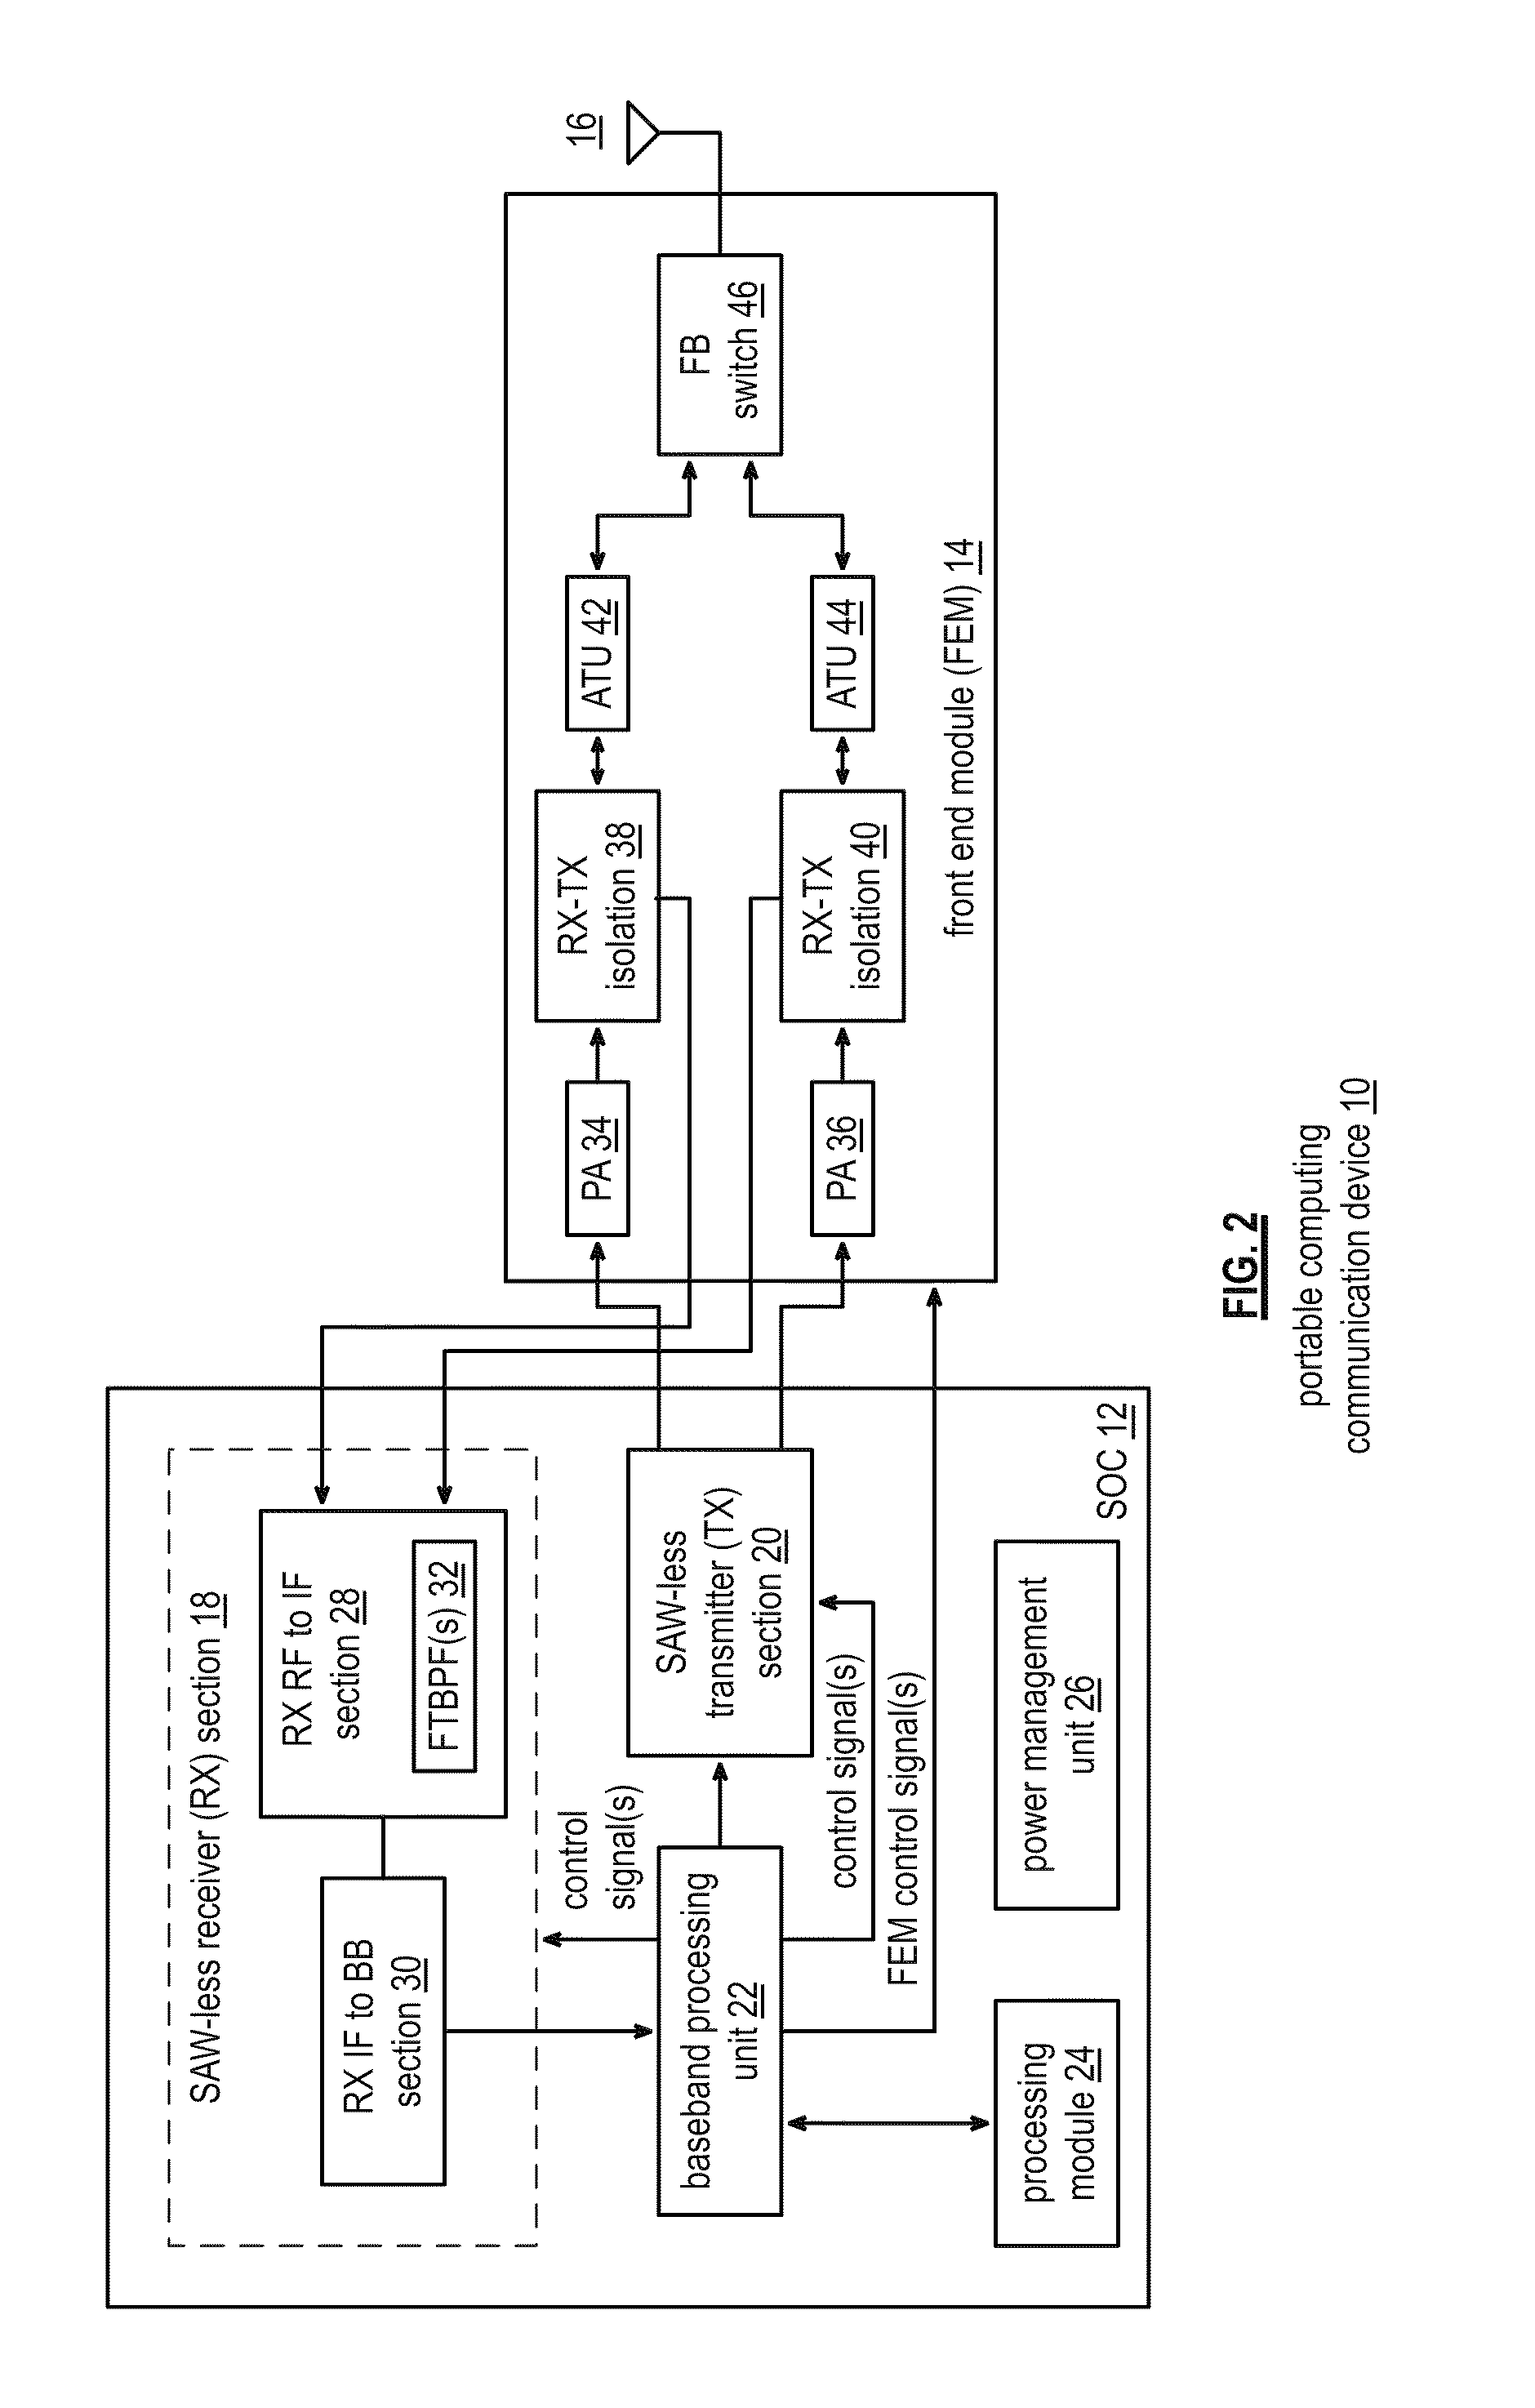 Portable computing device with a saw-less transceiver